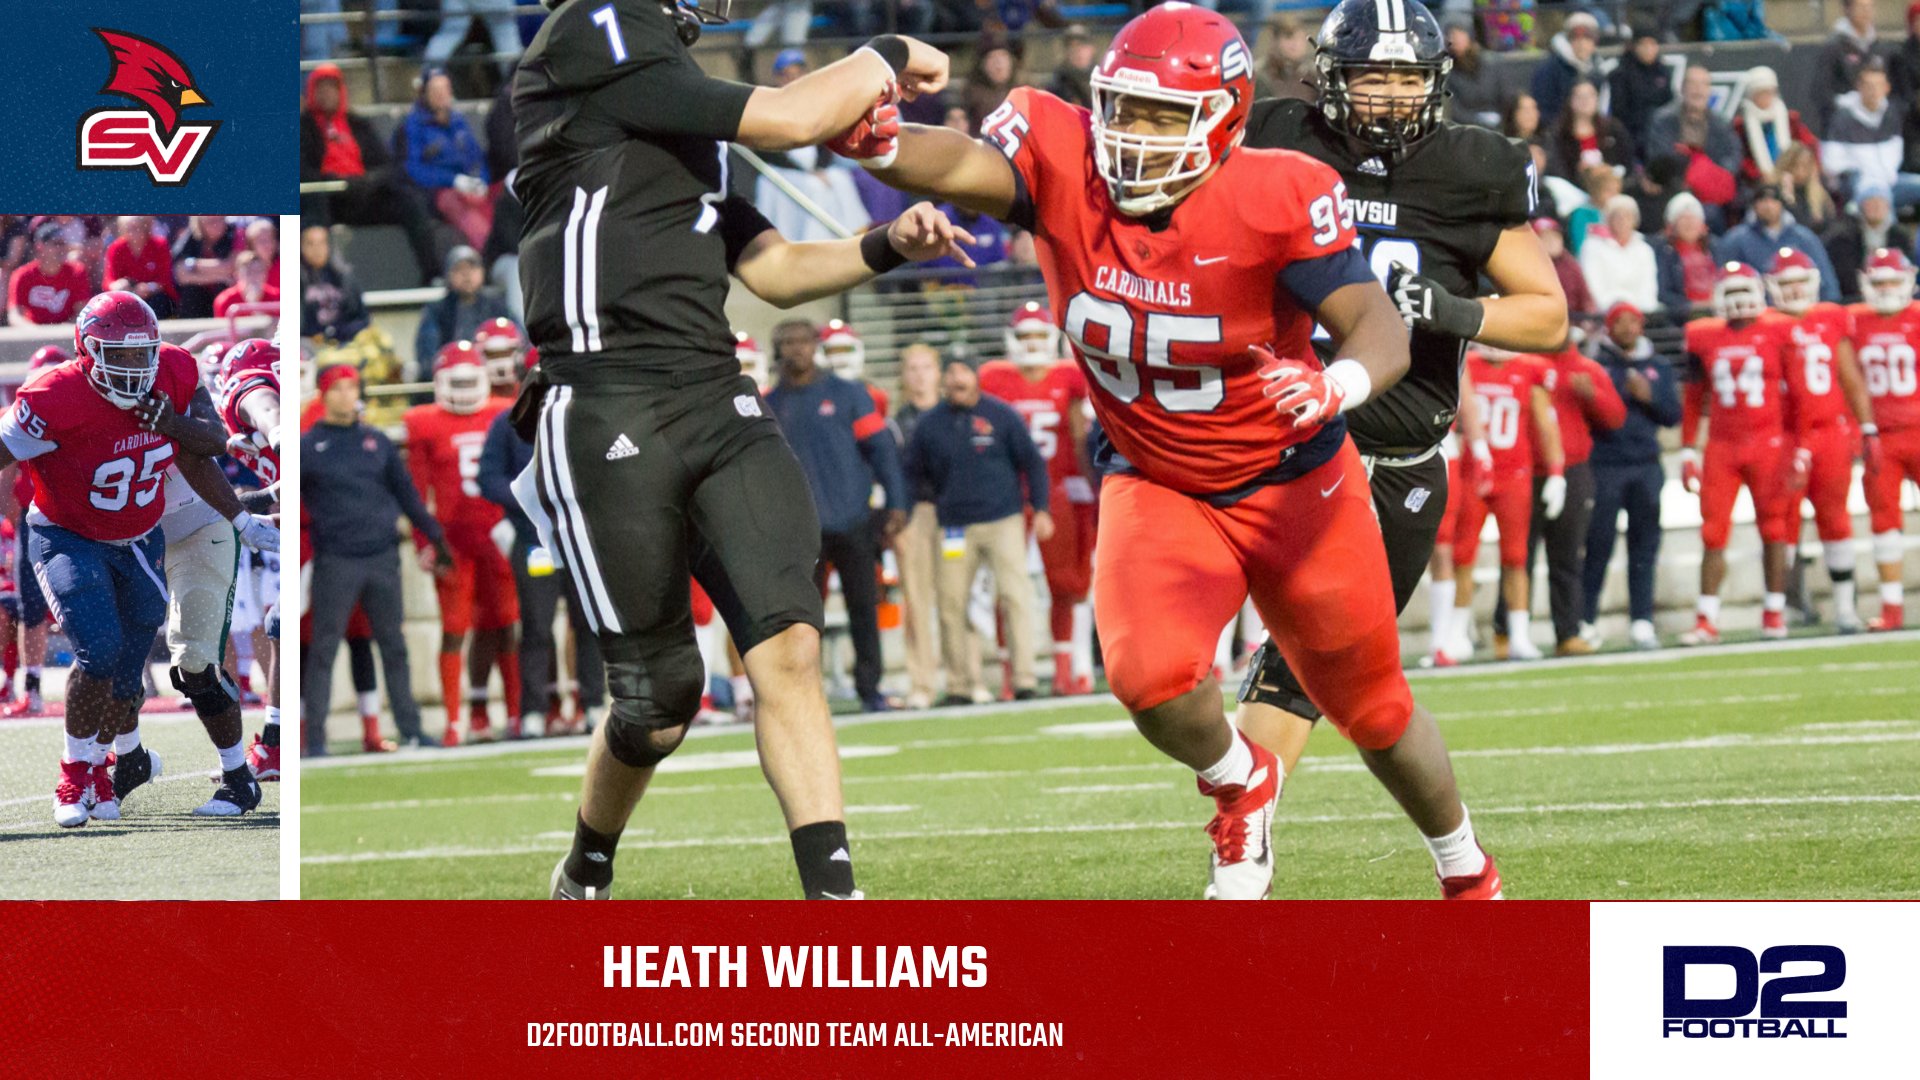 Williams adds another postseason honor, being named D2Football.com Second Team All-American